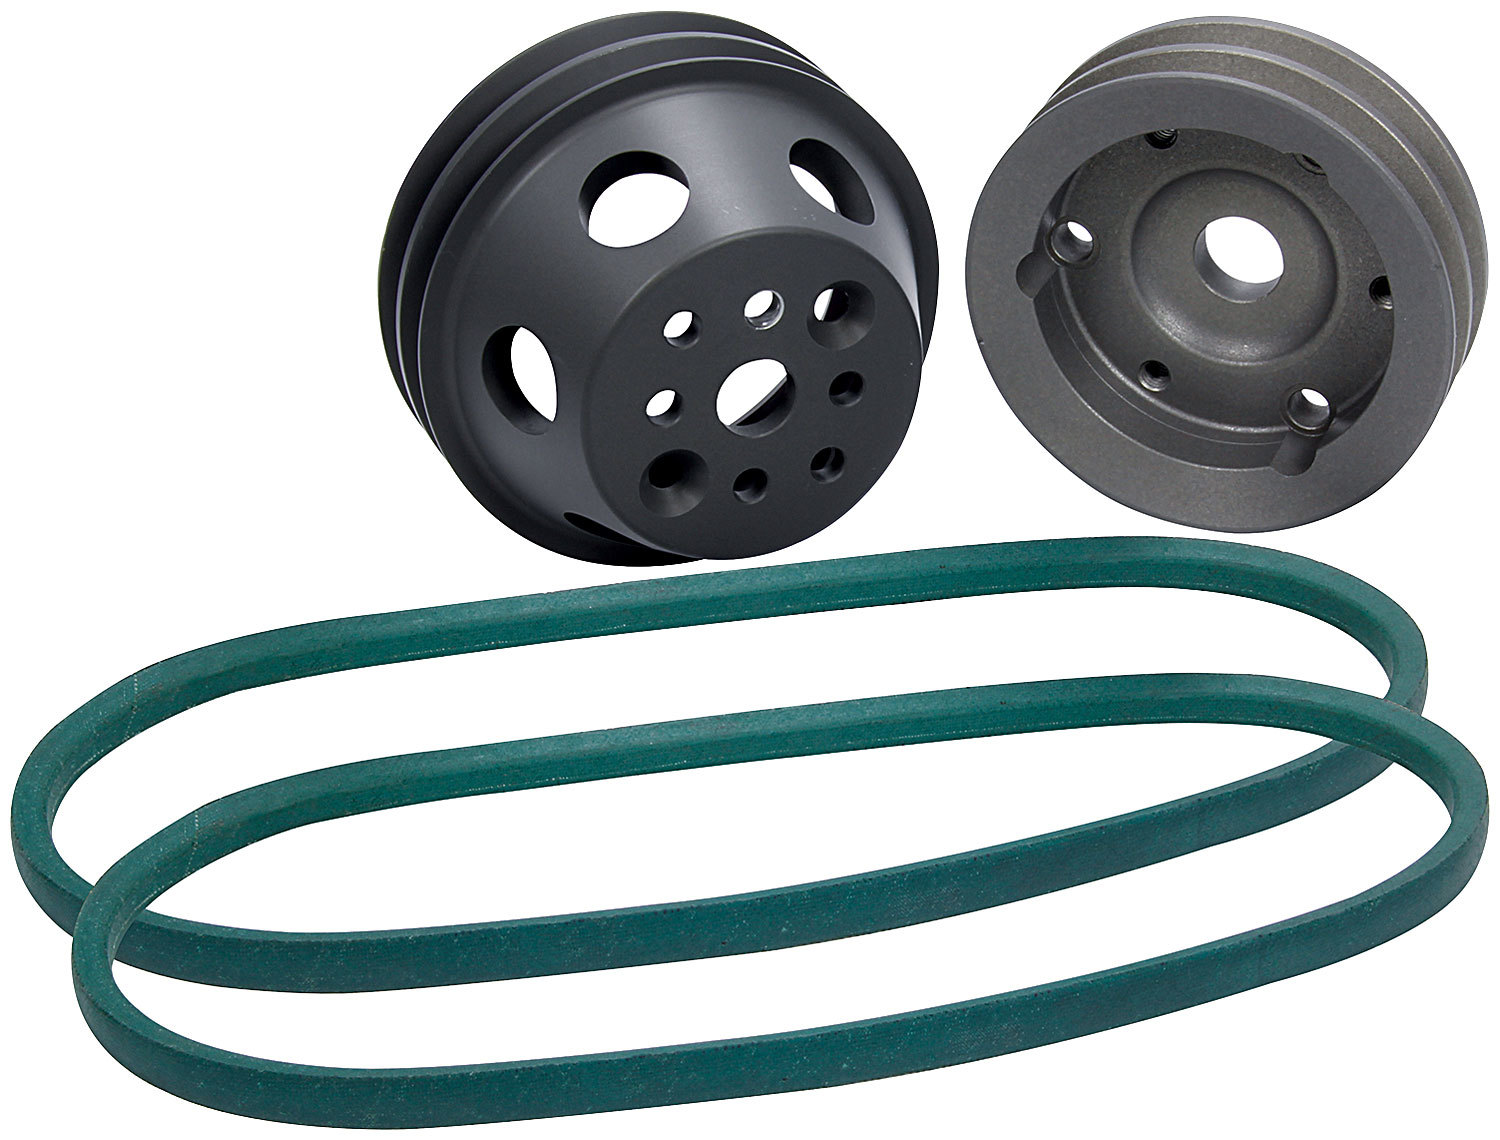 Pulley Kit - 1 to 1 - 2 Groove V-Belt - Billet Aluminum - Natural - Small Block Chevy - Kit